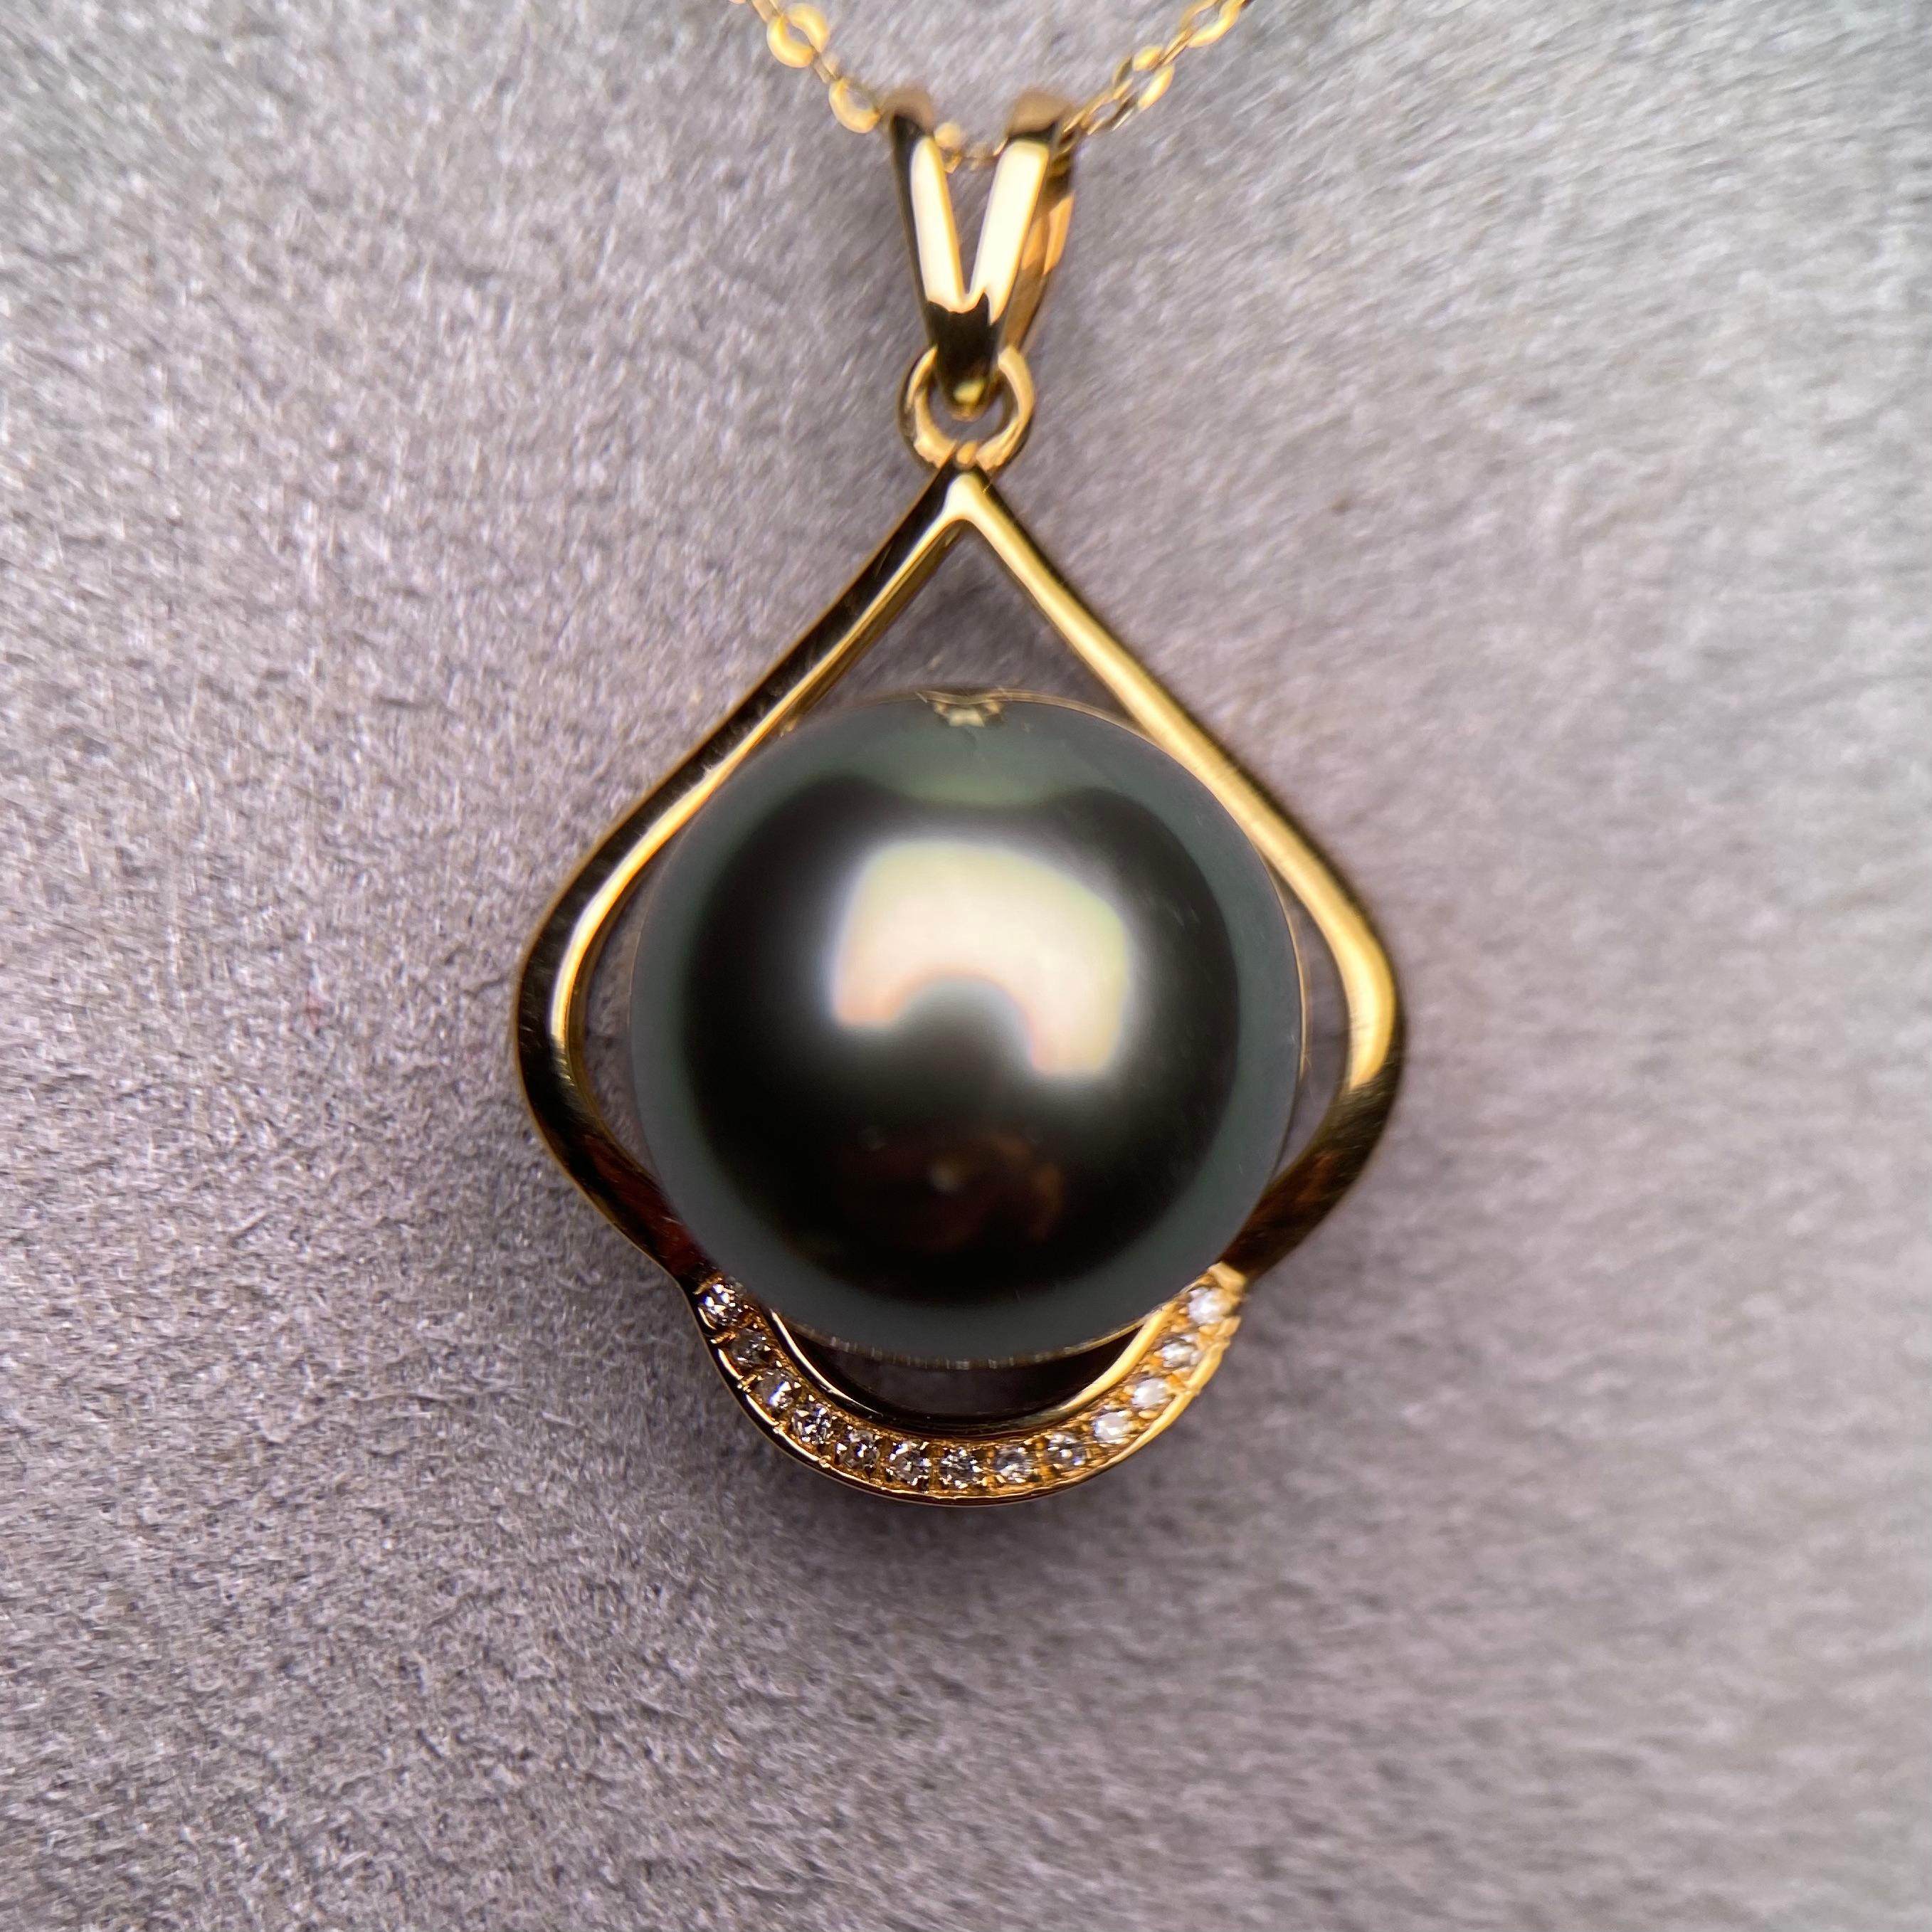 A 12.7 mm Dark Grey Colour Tahitian Pearl and Diamond Pendant in 18k Yellow Gold
It consists of a round Shape Tahitian Pearl with excellent Lustre and Very Minor Surface Blemish.
The Pearl is Dark Grey in colour with Green Overtone and Purple